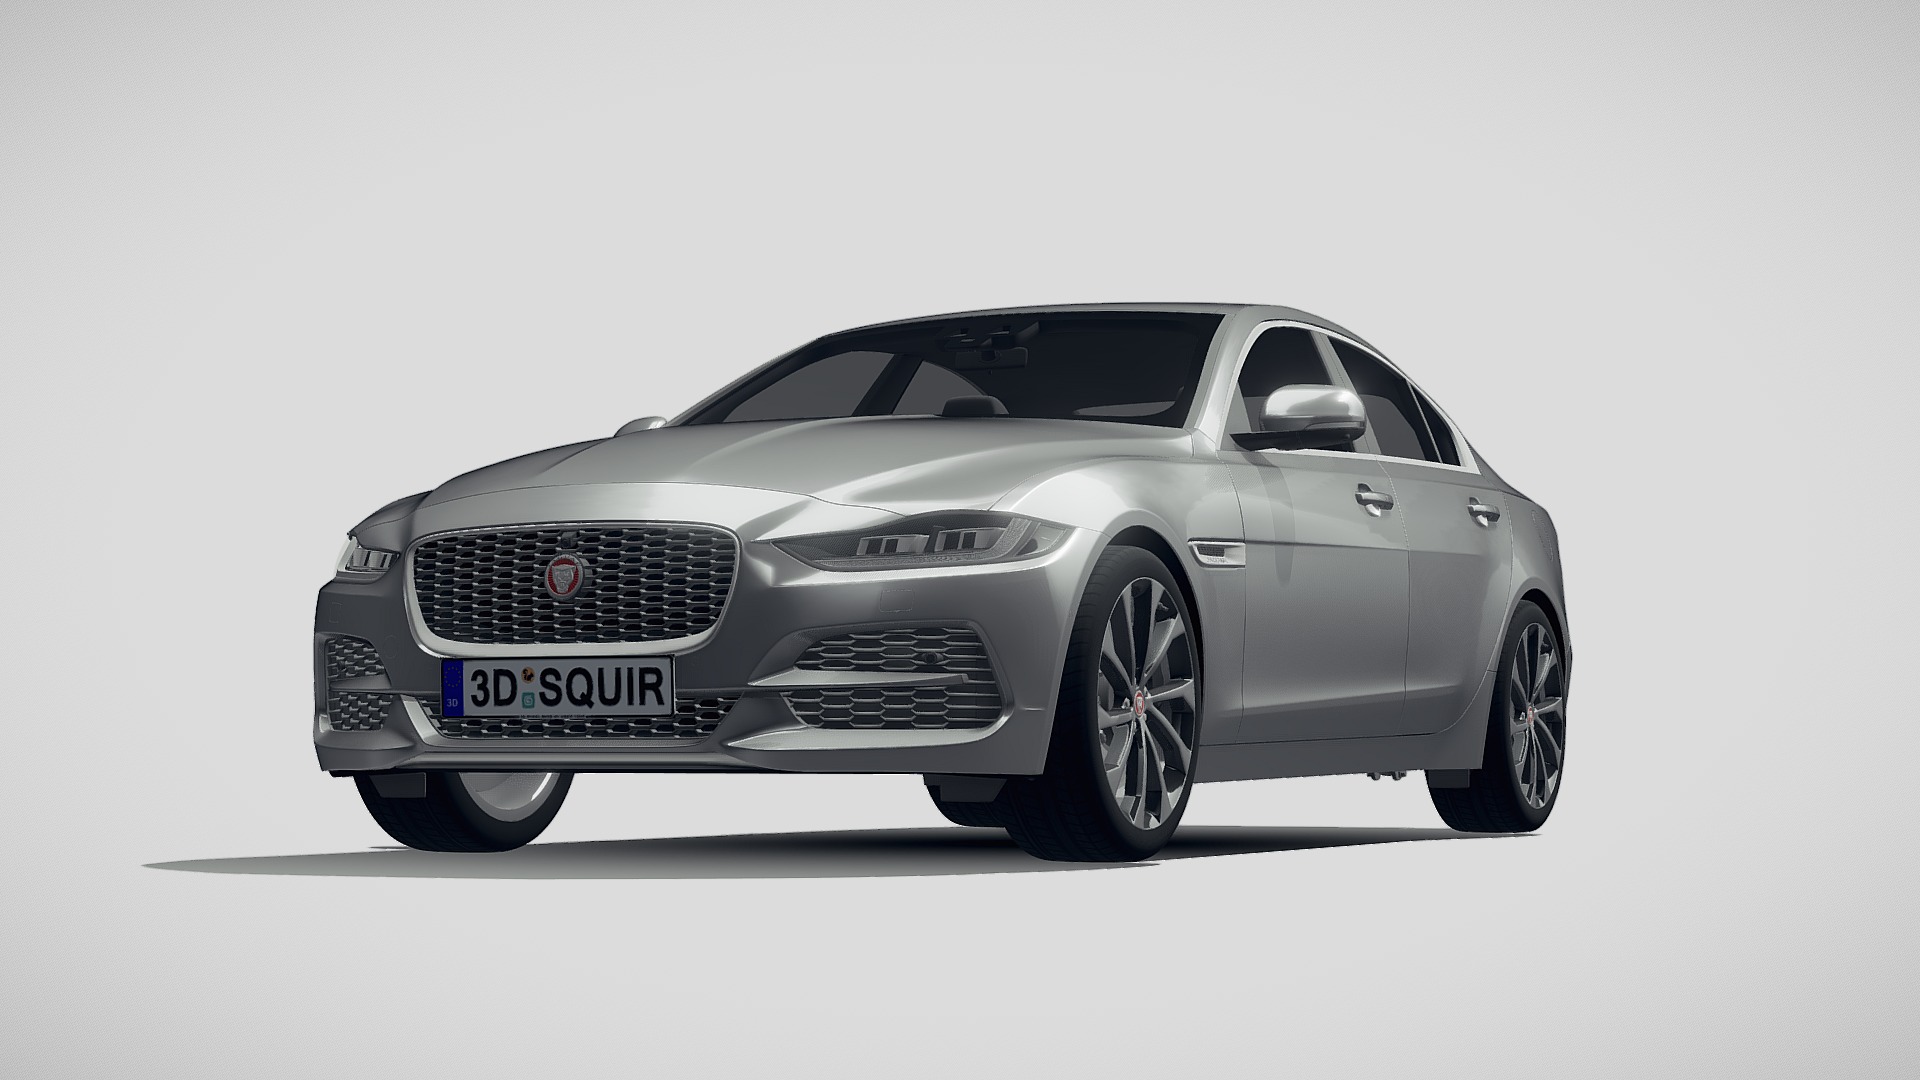 3D model Jaguar XE 2020 - This is a 3D model of the Jaguar XE 2020. The 3D model is about a silver car with a white background.